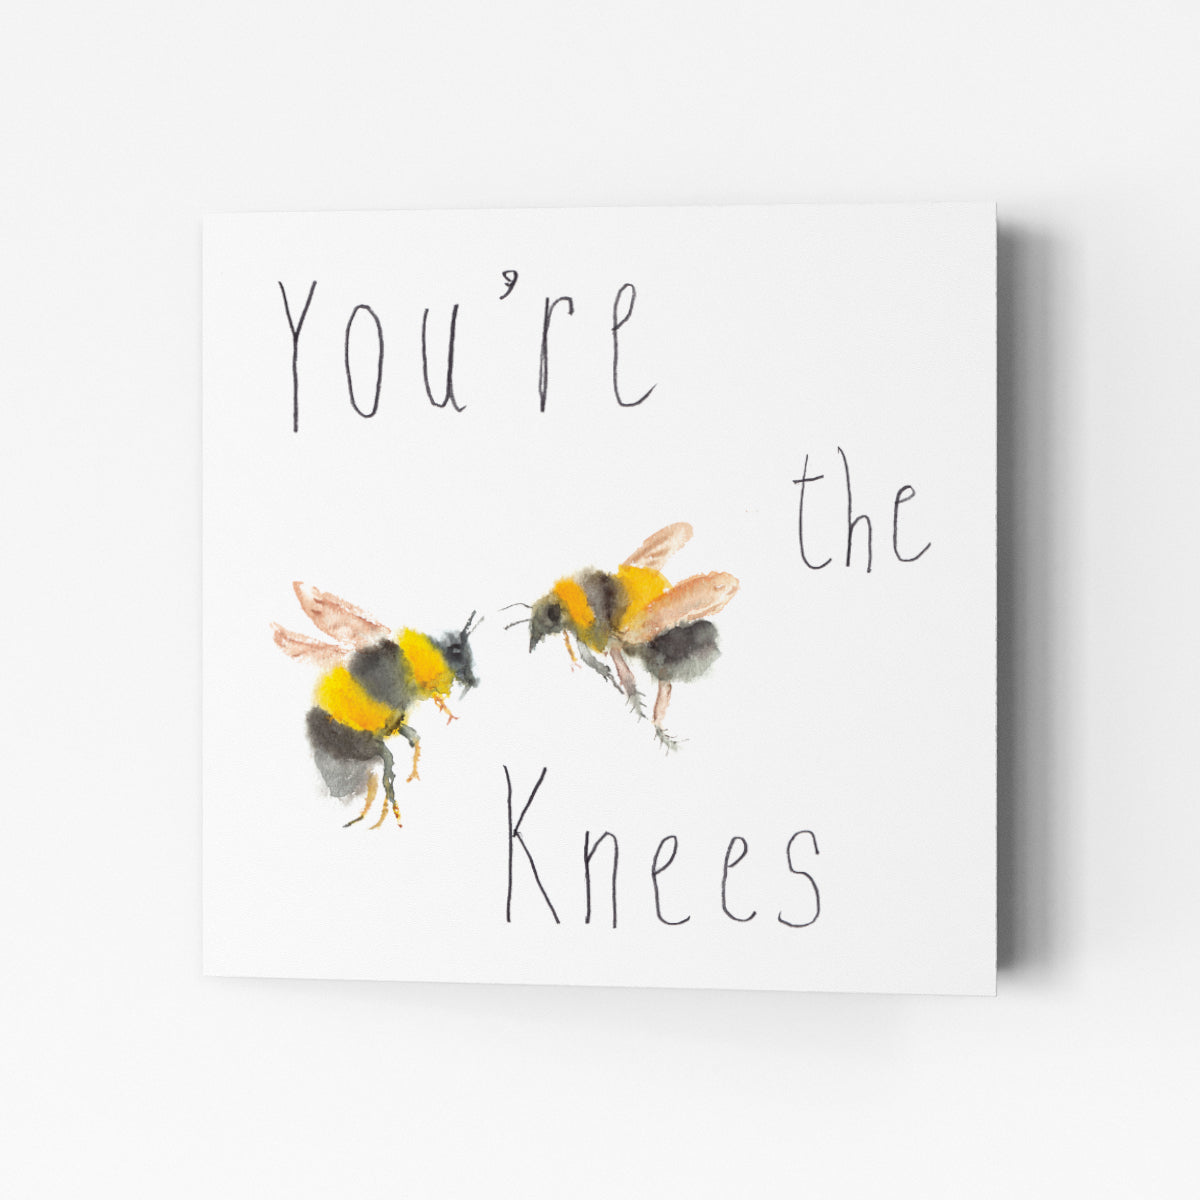 You're the Bee's Knees